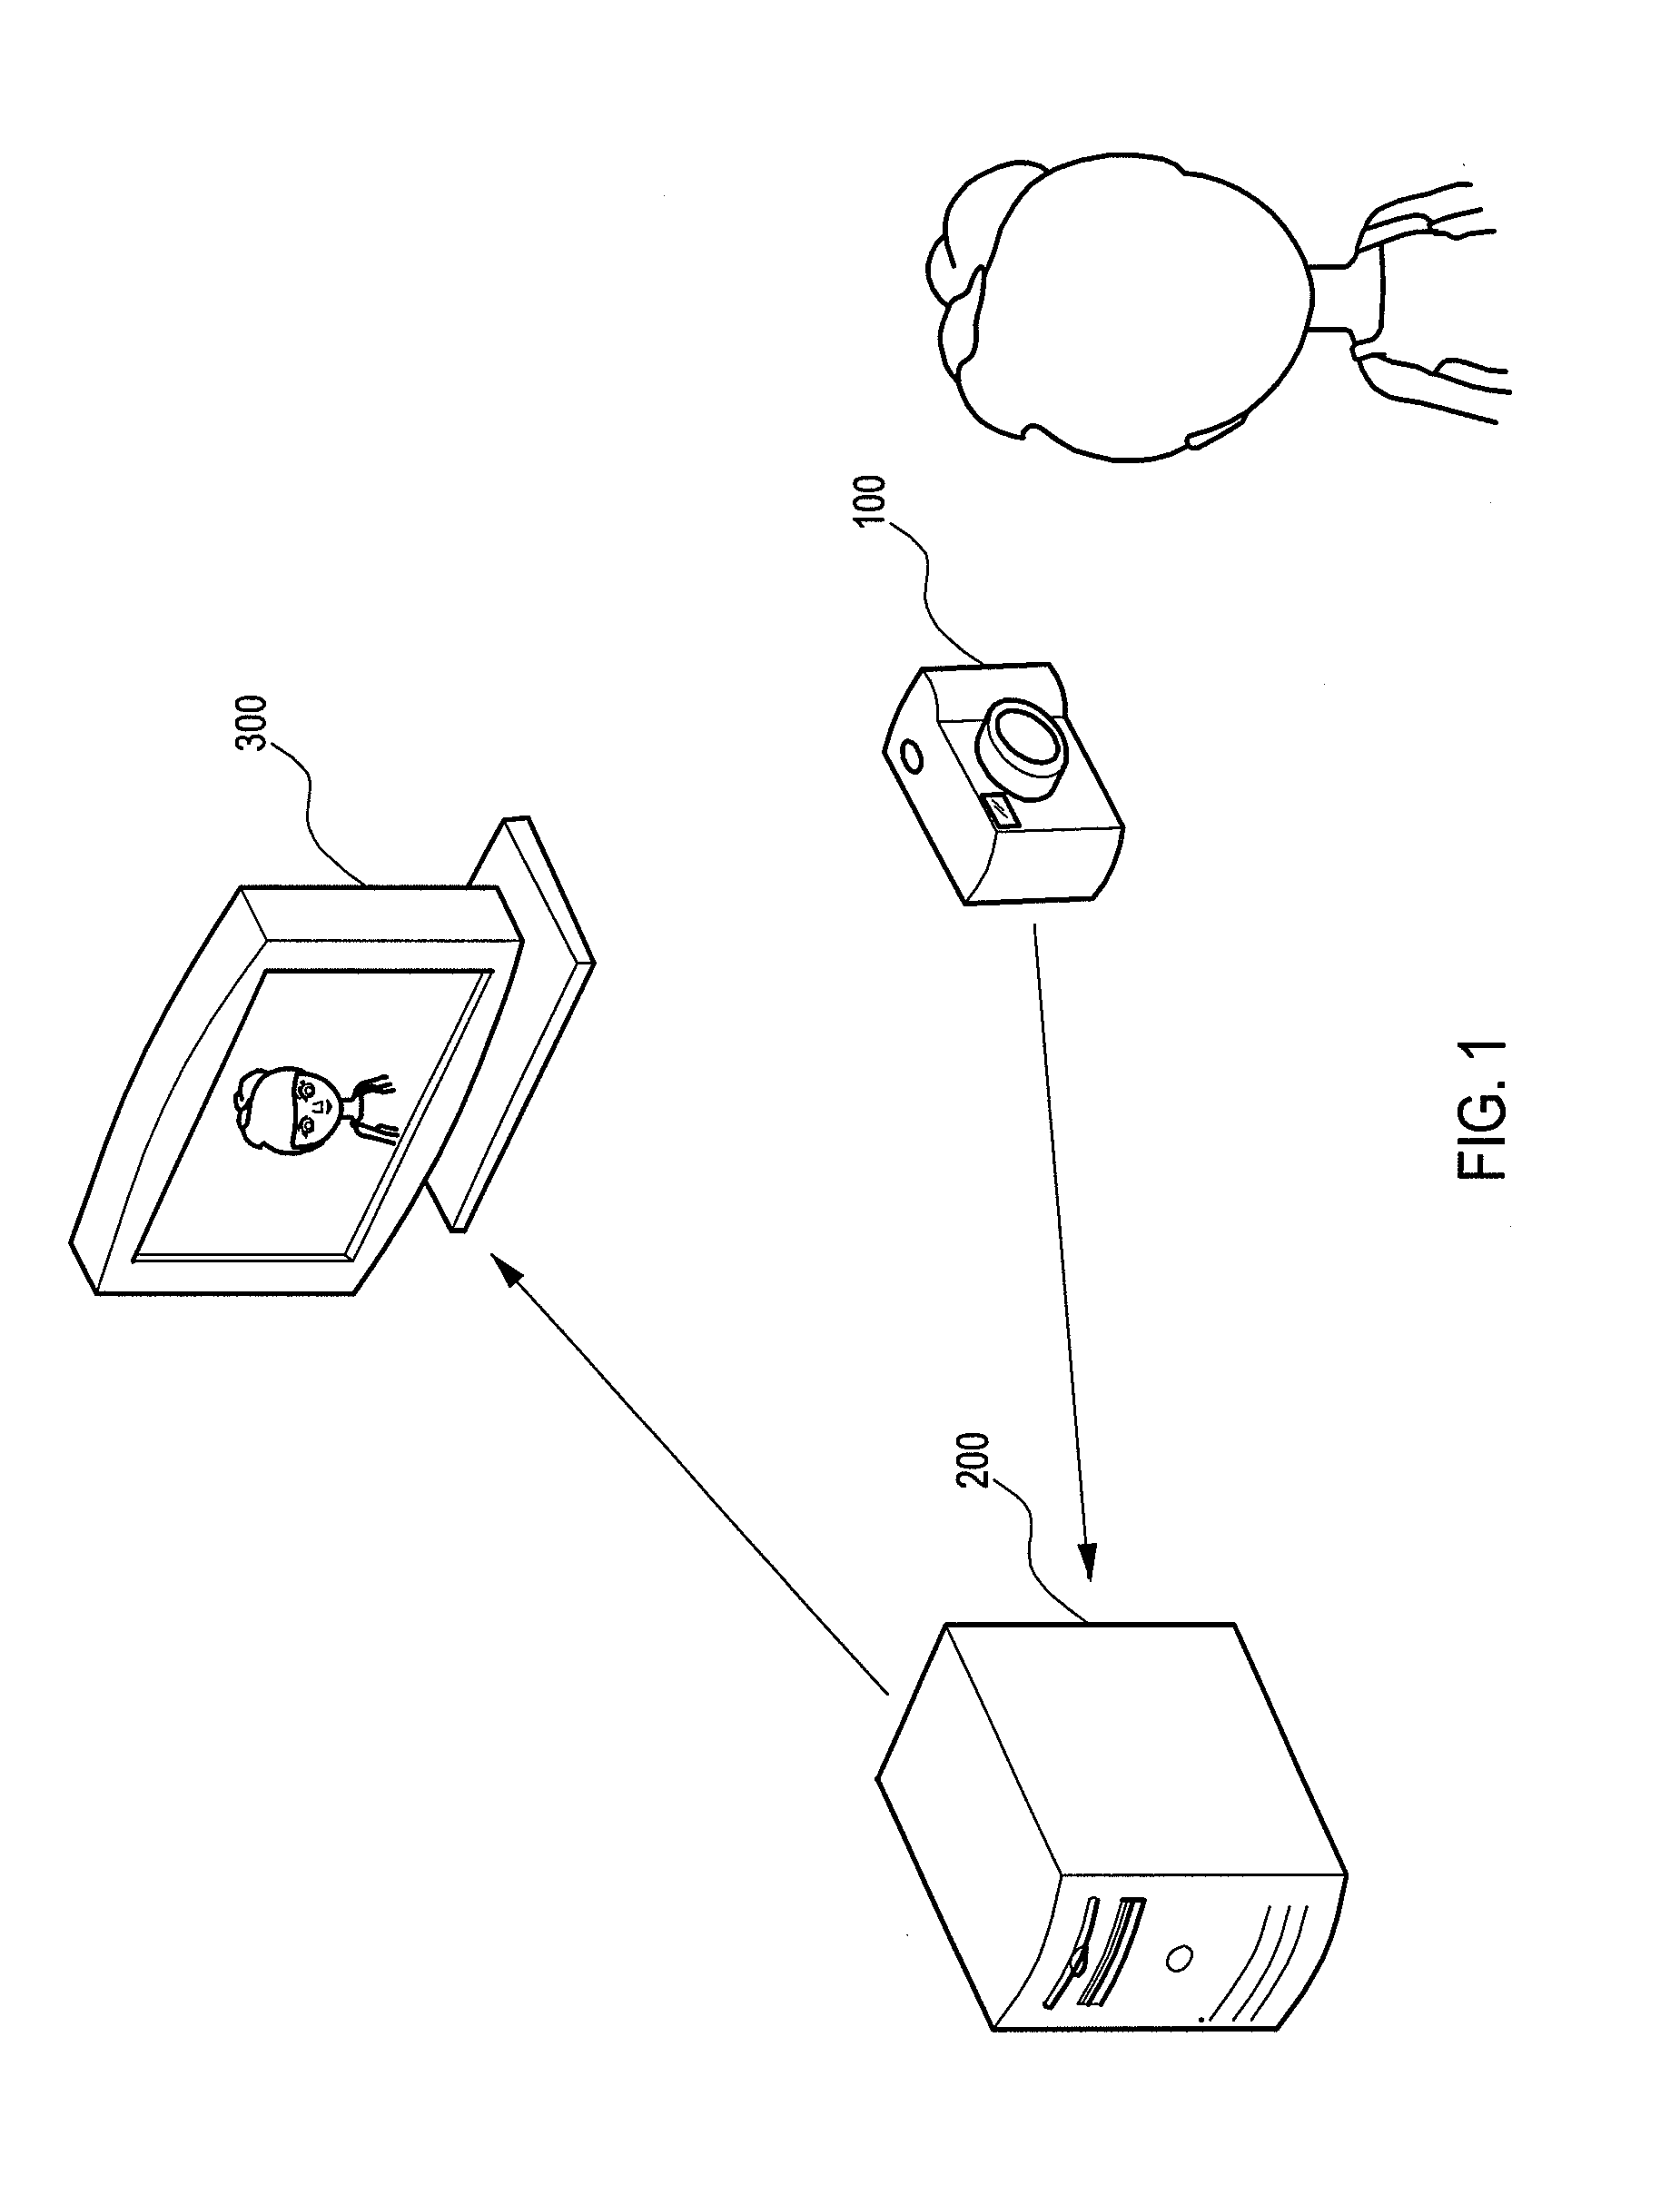 System, device, method, and computer program product for facial defect analysis using angular facial image